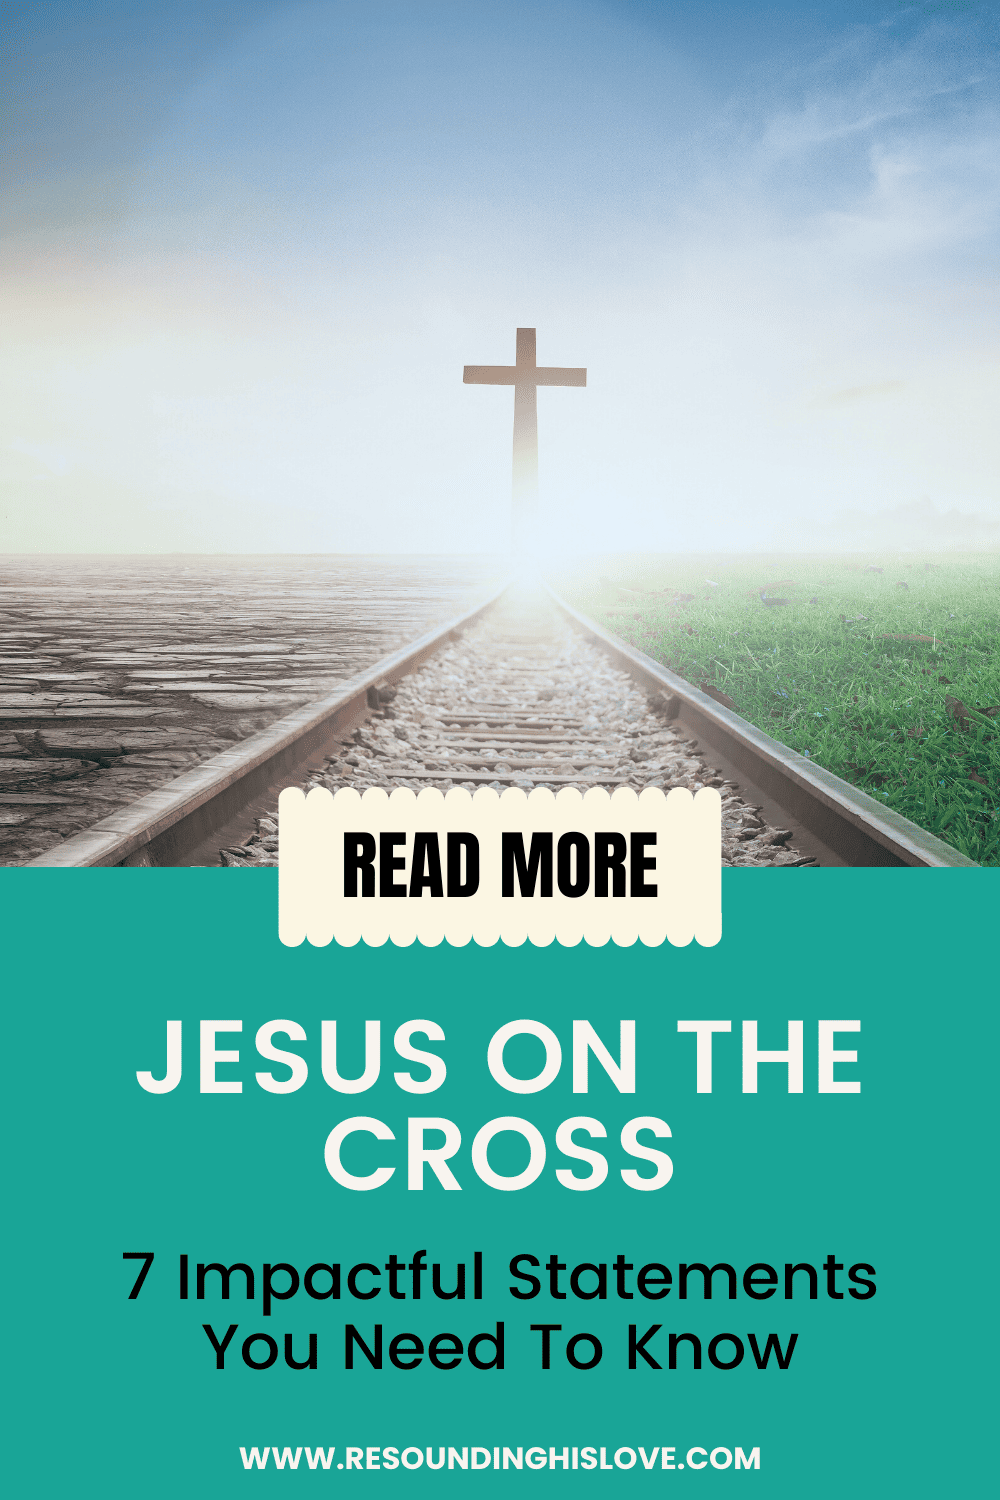 Jesus On The Cross What Are The 7 Impactful Statements You Need To Know